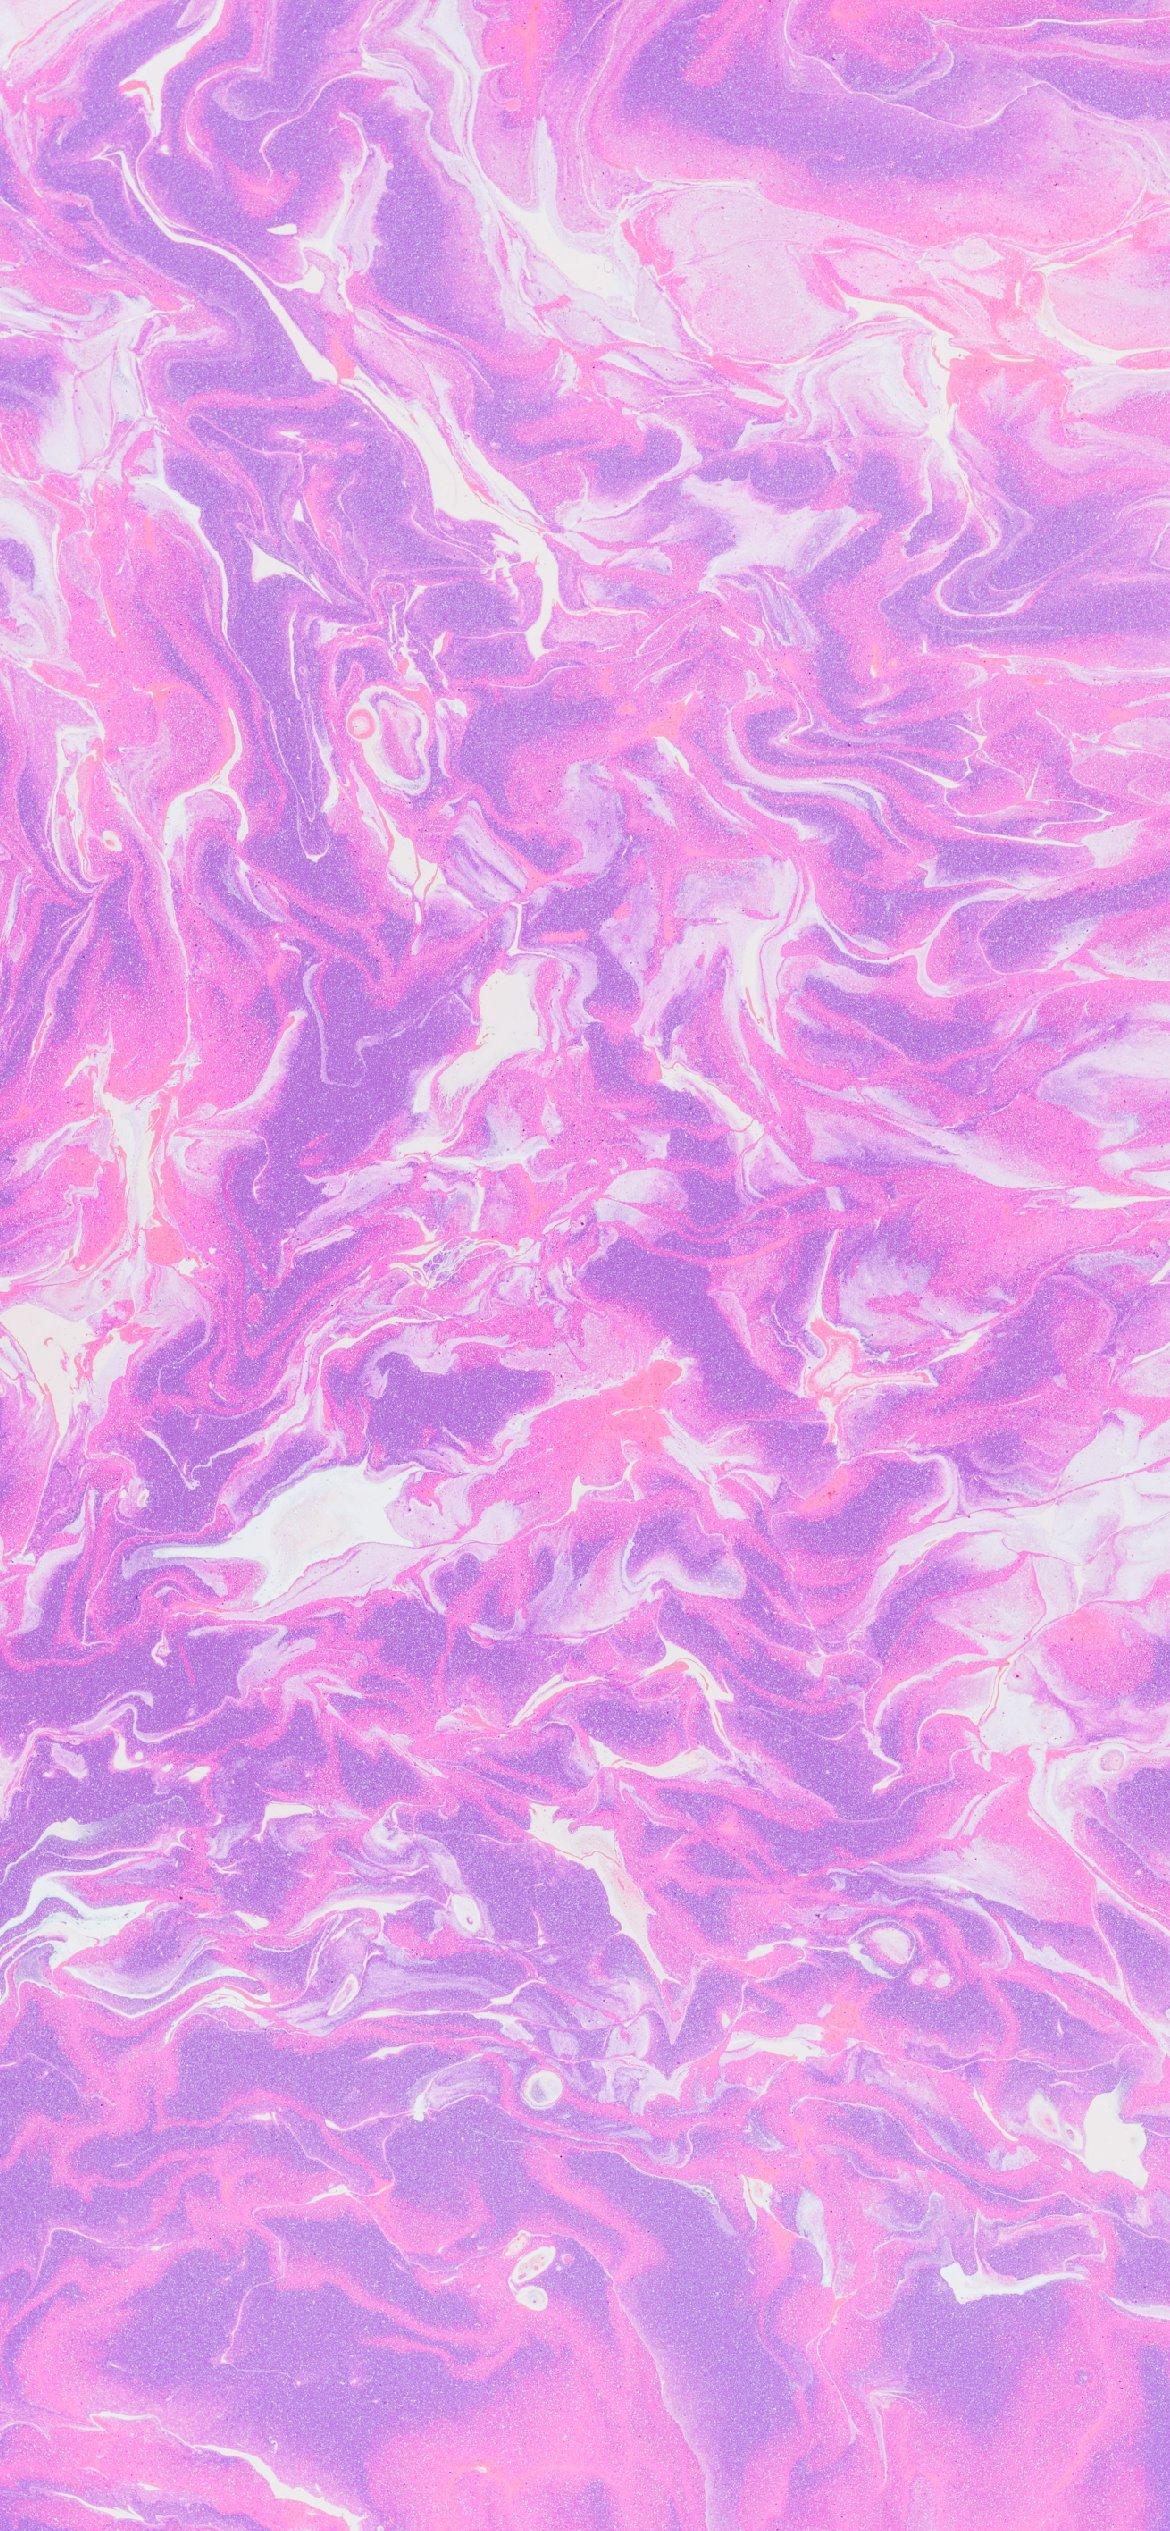 Purple Aesthetic Wallpaper Background Perfect For Your iPhone